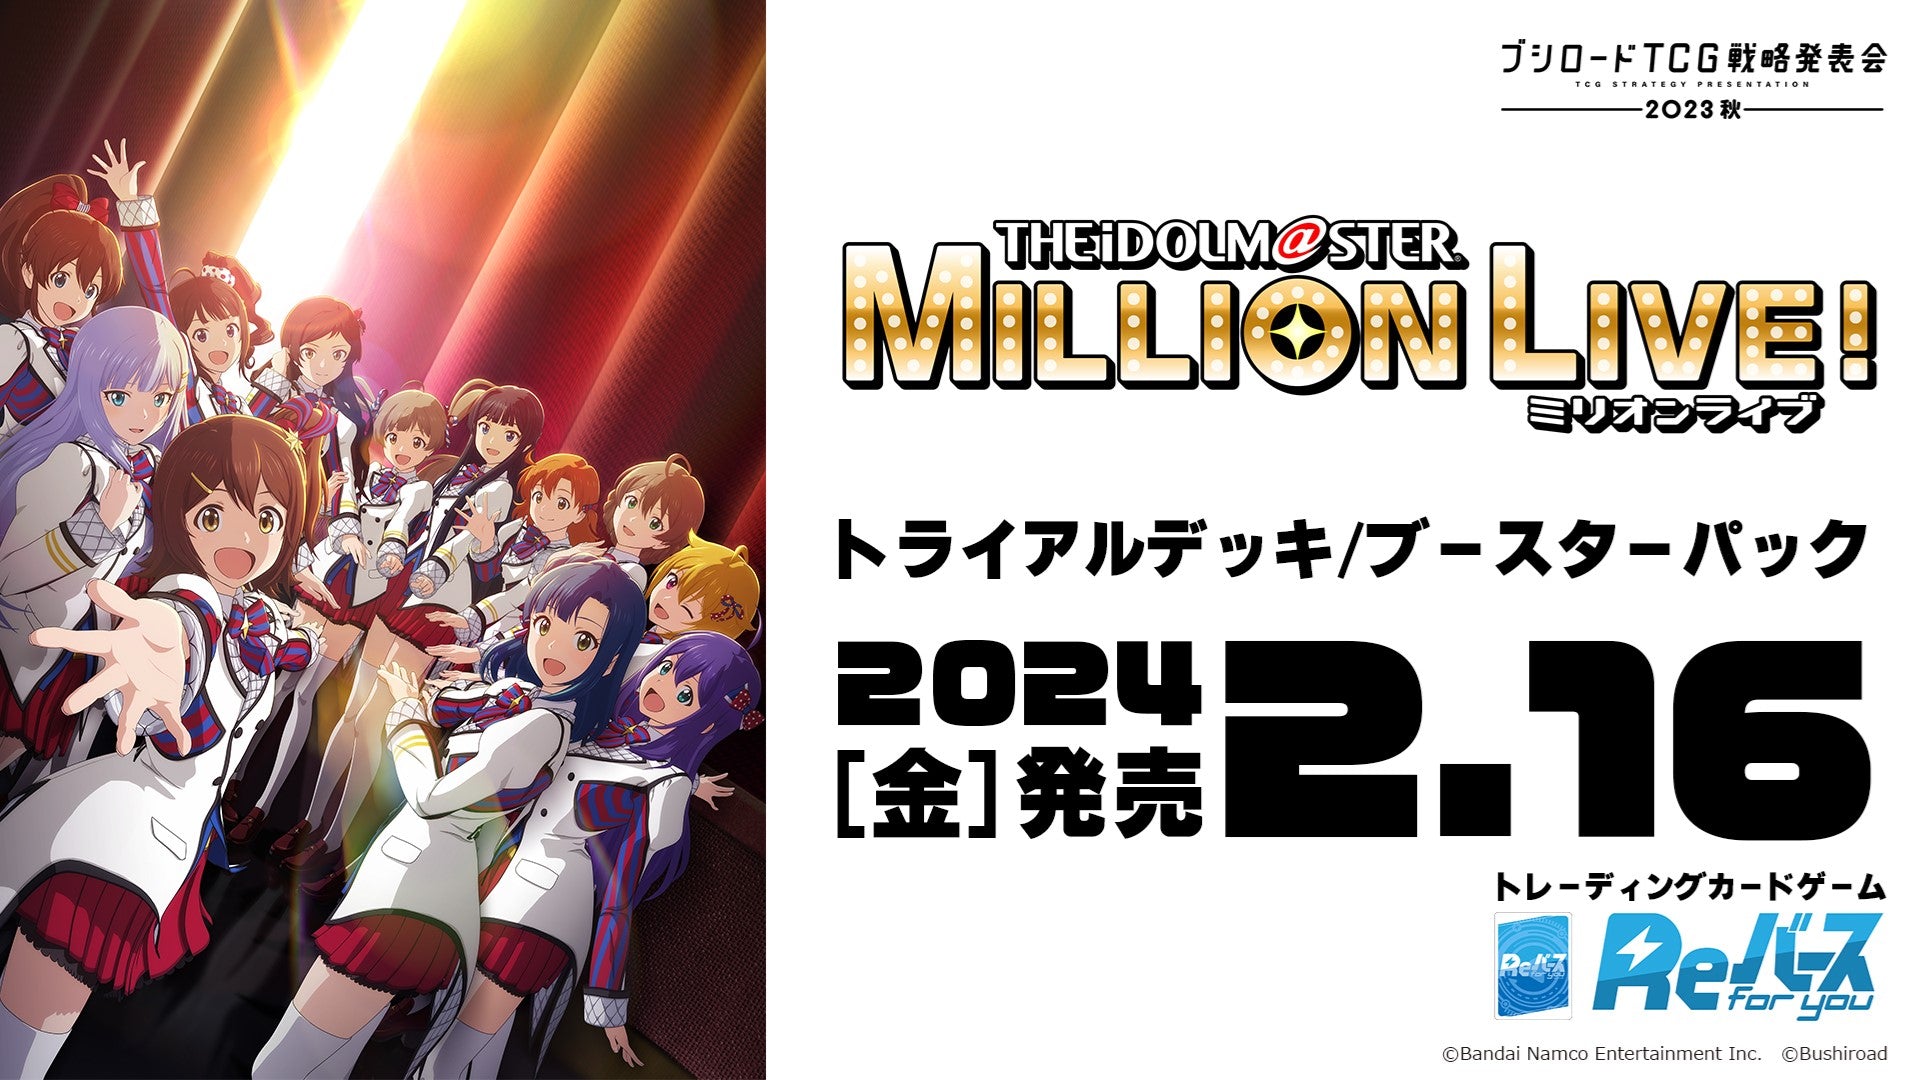 ReBirth for you Booster Pack "The Idolmaster Million Live!" Box / Case [Preorder 12/18/24] - n4ytcg